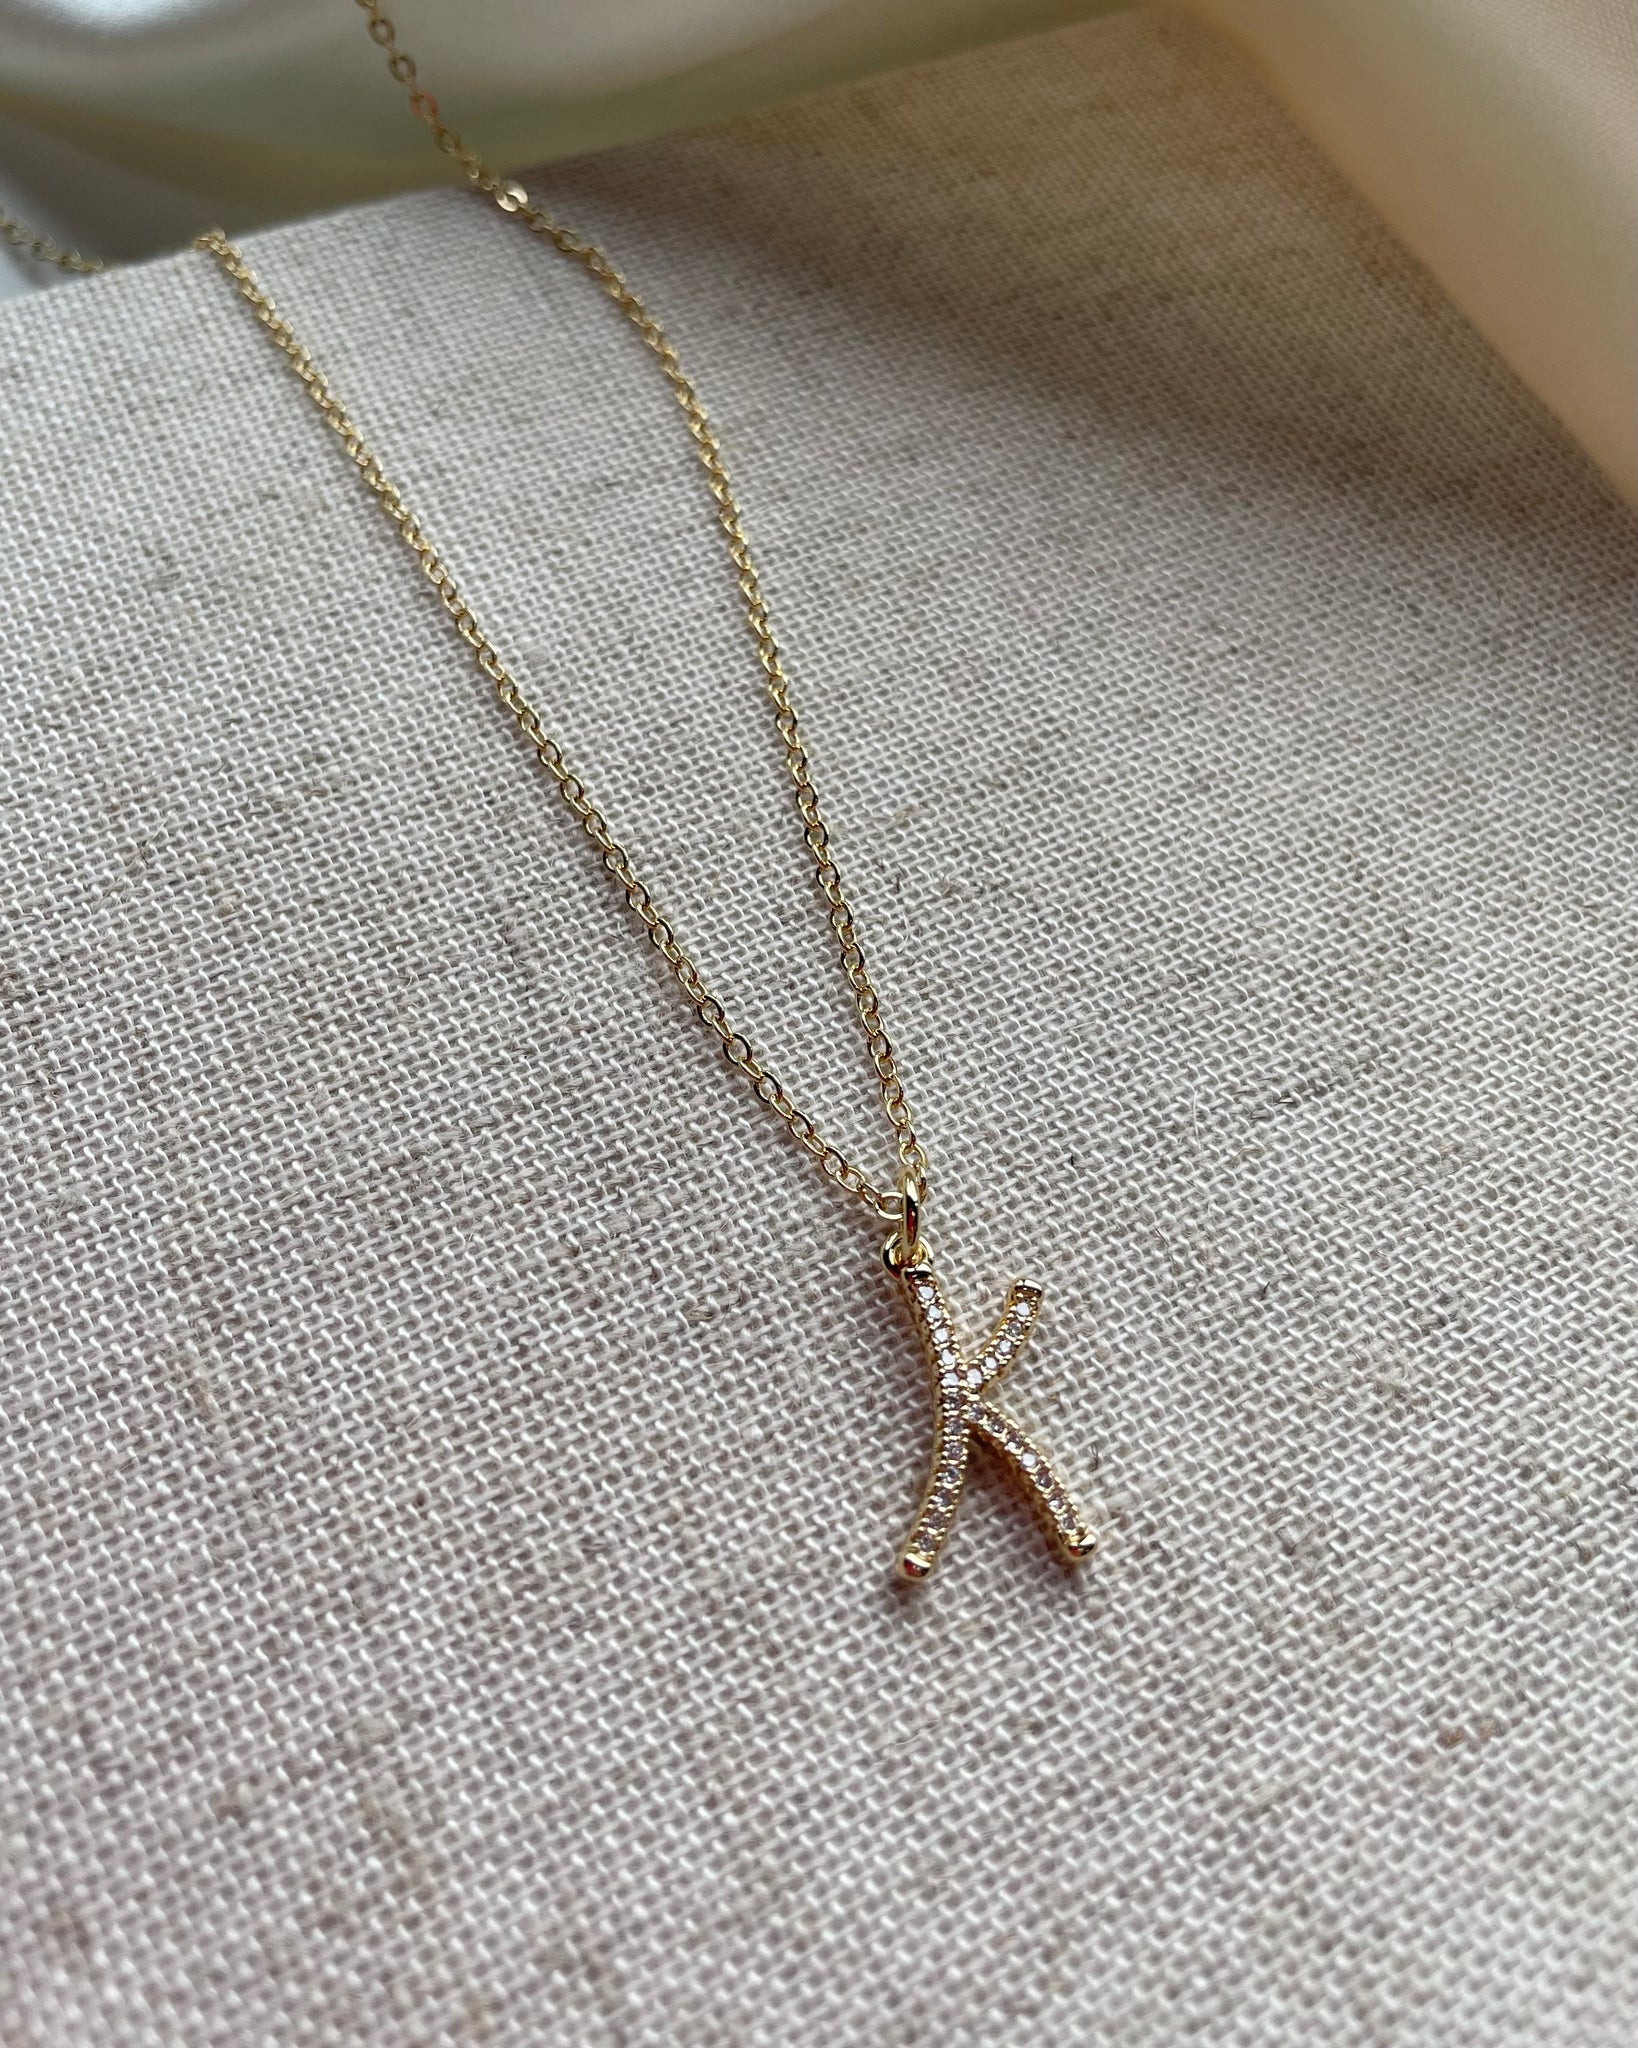 IVY | large cz initial necklace